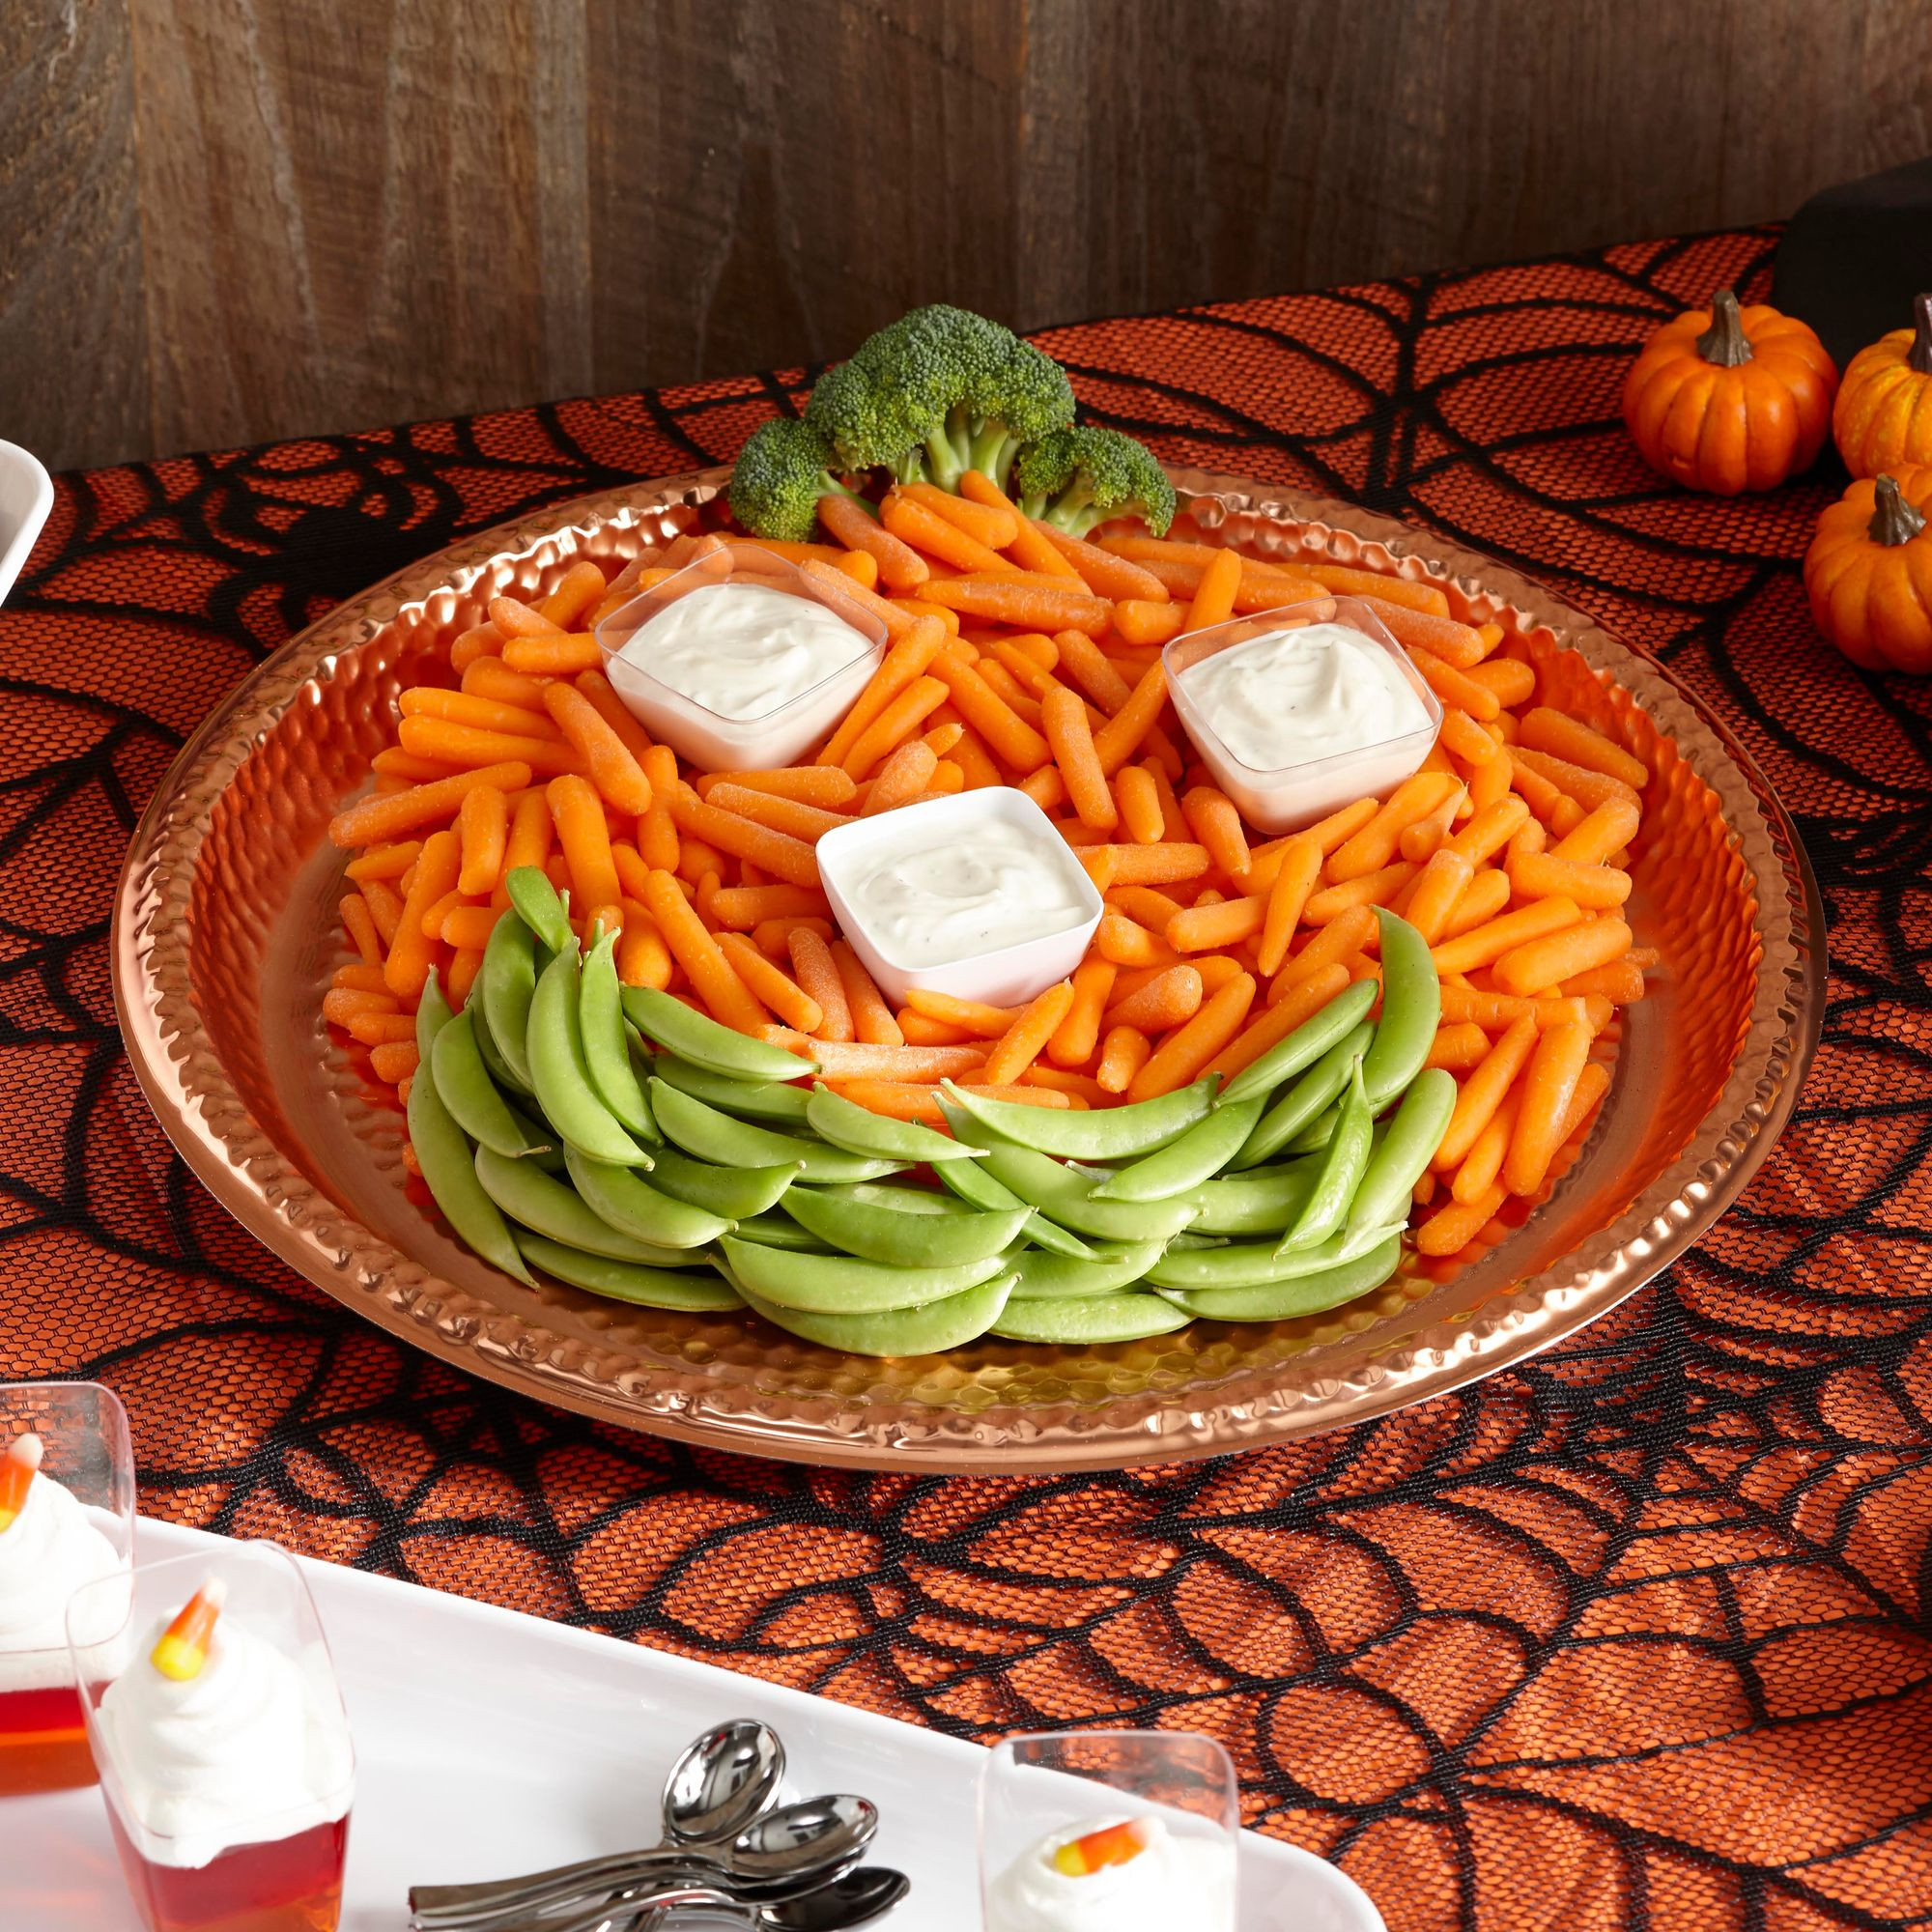 Hosting A Halloween Party Ideas
 Hosting a Halloween party doesn’t have to be scary Our